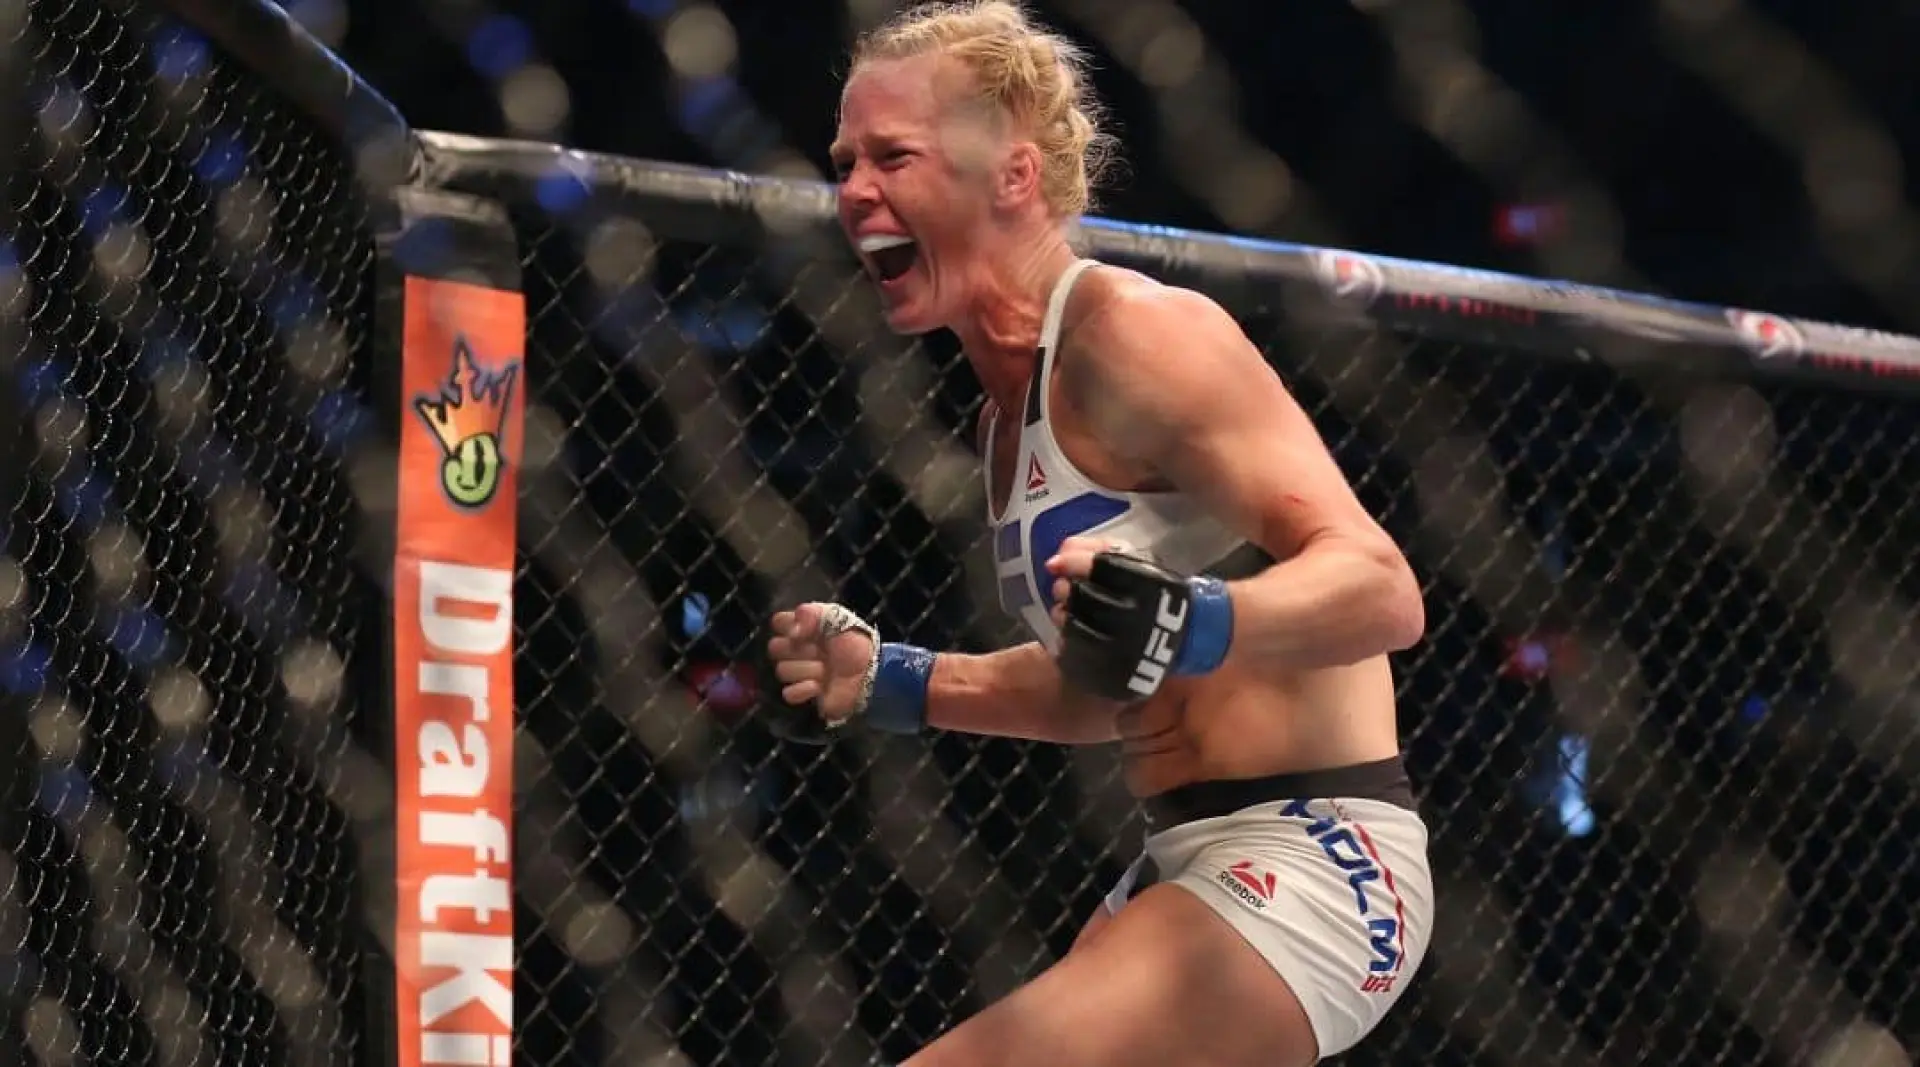 Holly Holm - UFC 208 betting odds